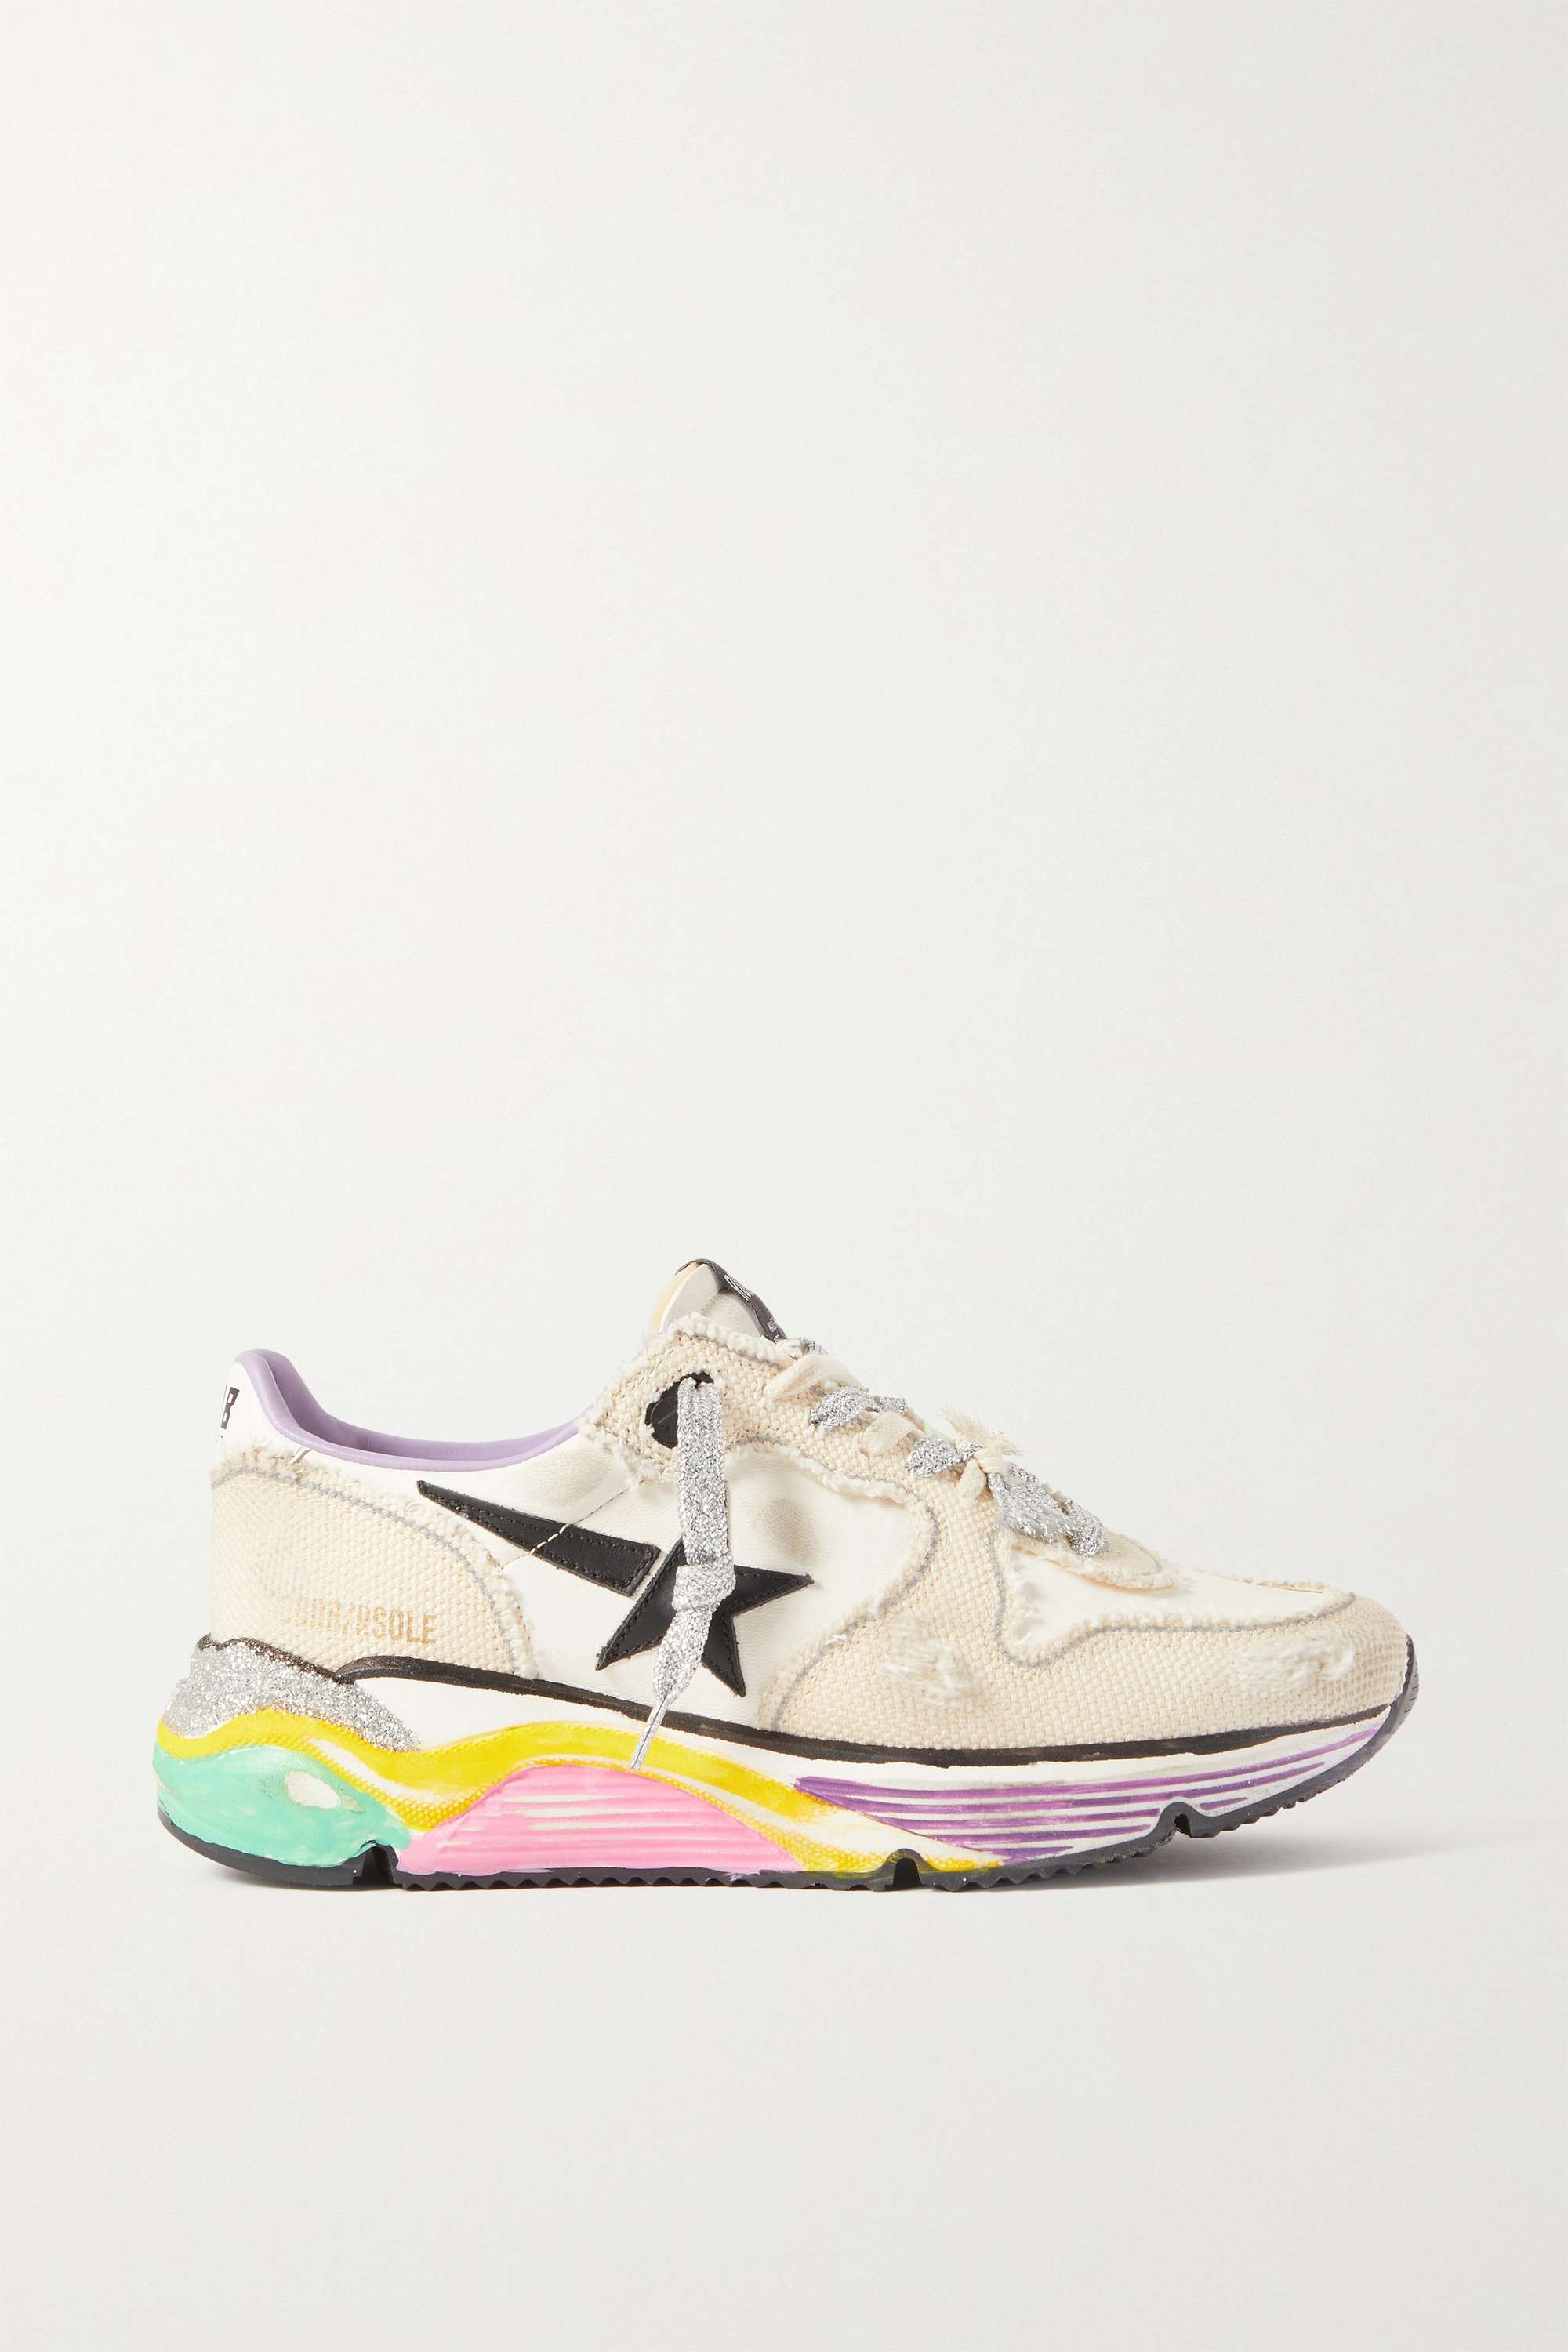 Golden Goose + Running Sole Distressed Leather and Canvas Sneakers